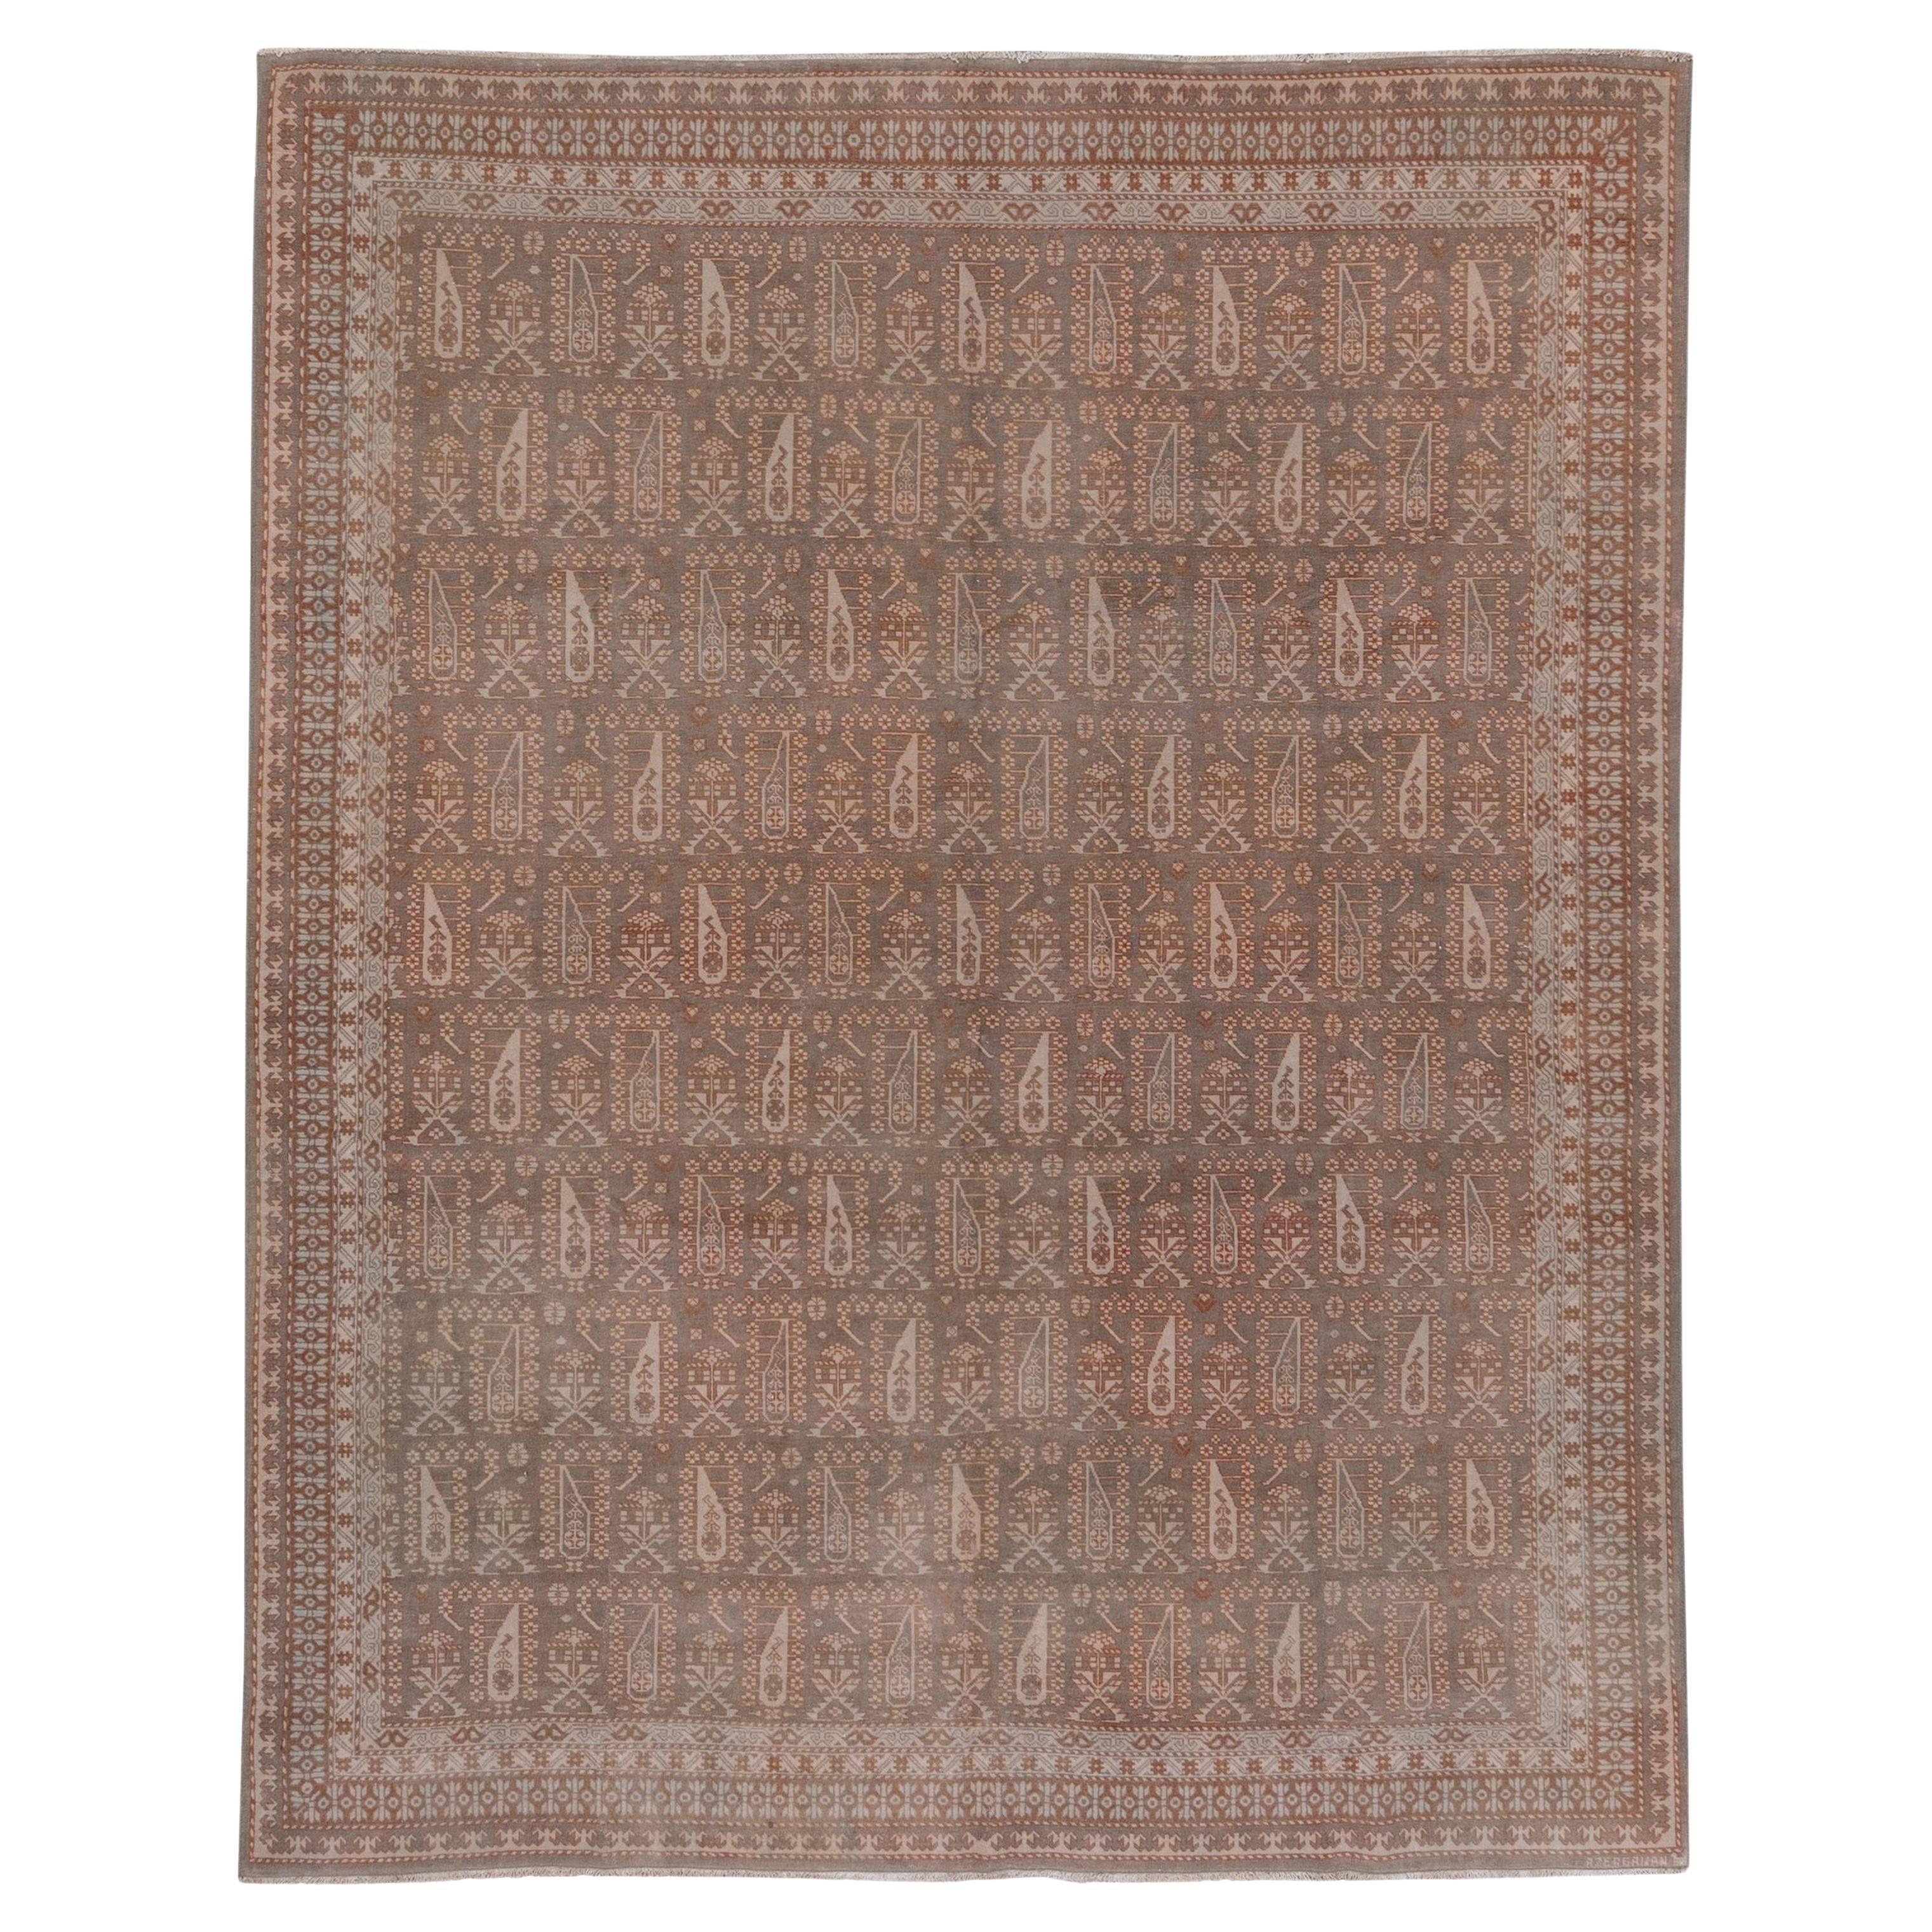 Tribal Turkish Sivas Rug, All-Over Field, Gray Field, Terracotta Accents For Sale